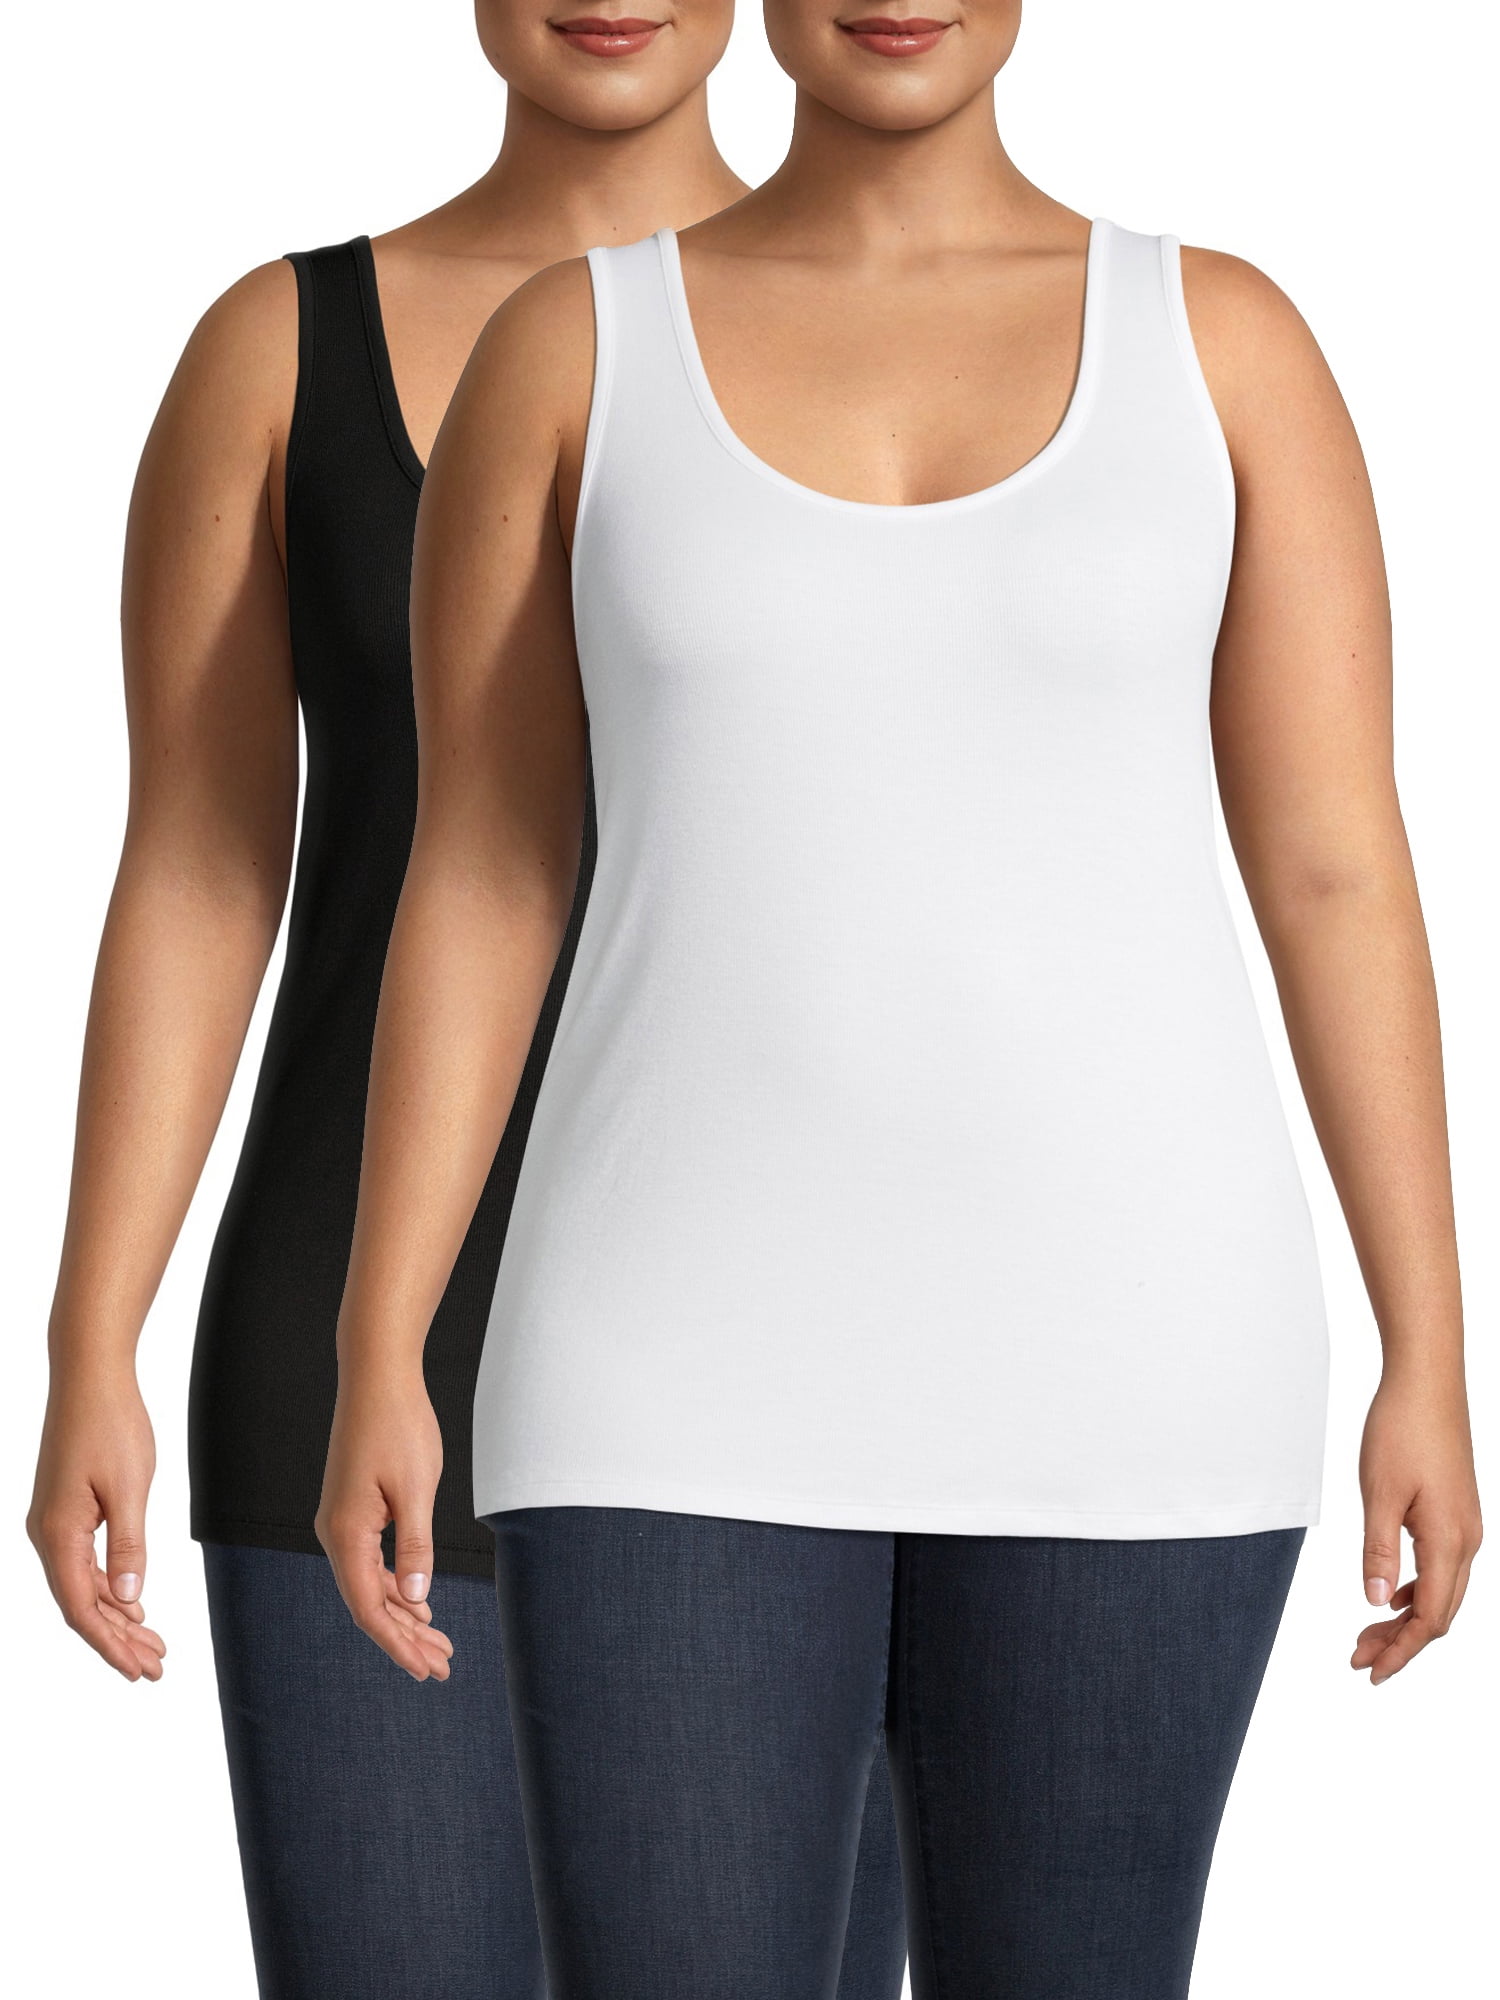 Pack of 2 Essentials Women's Plus Size 2-Pack Camisole